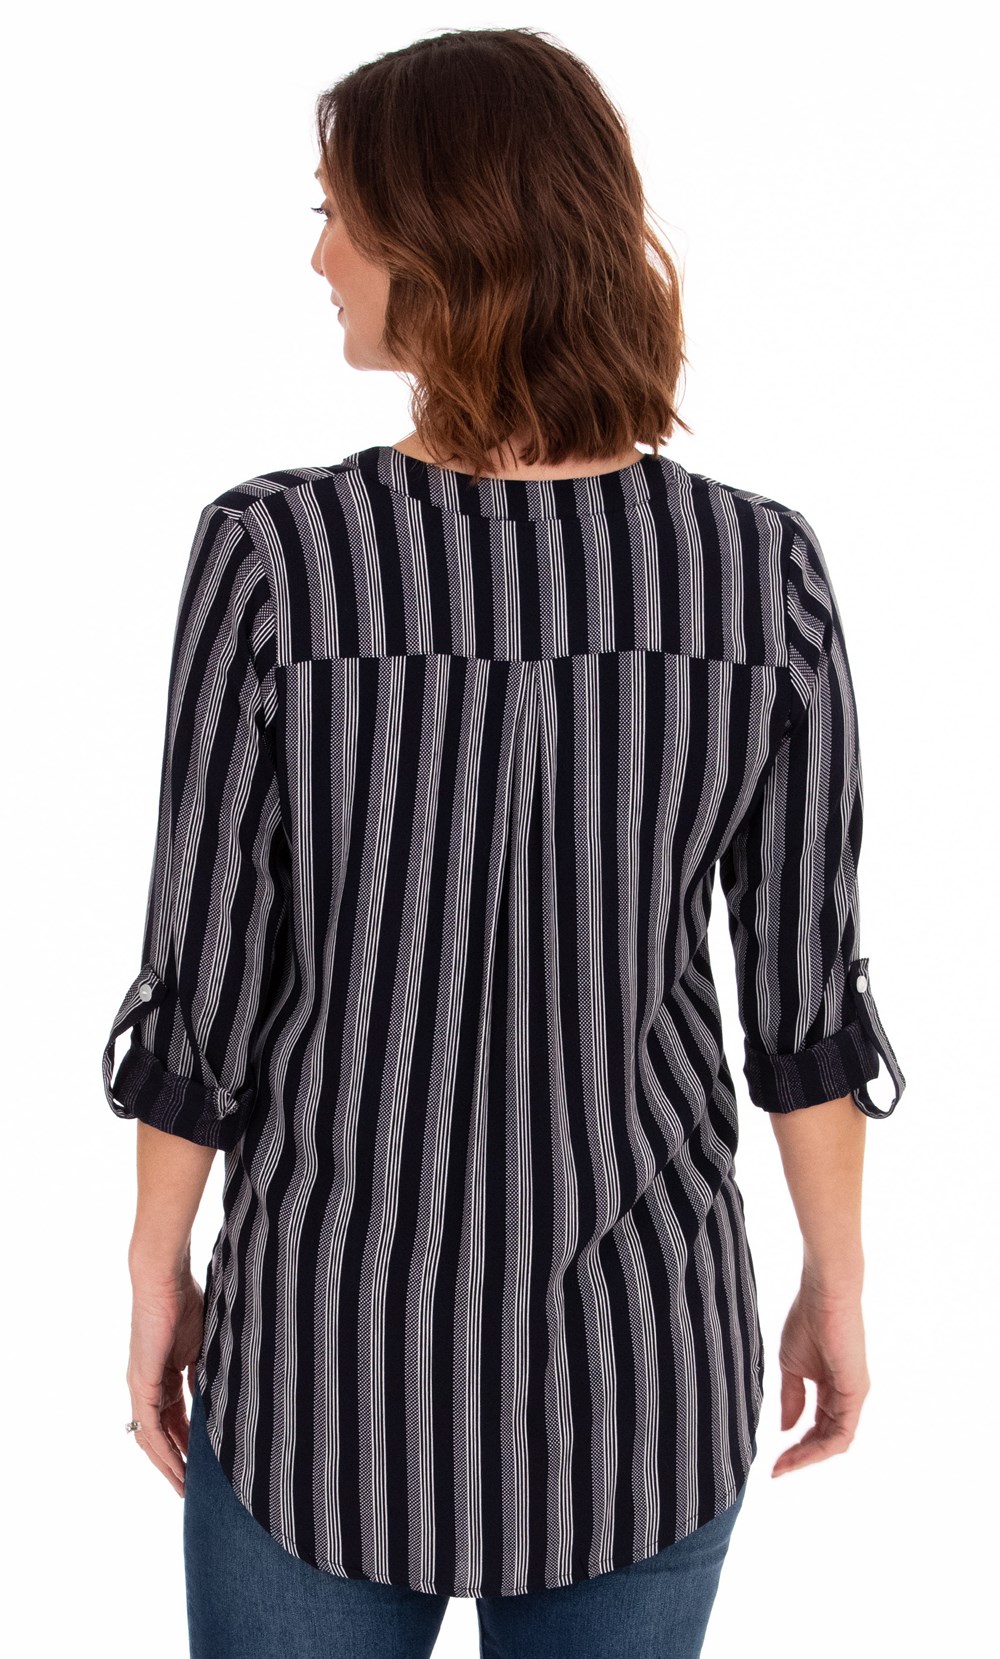 Striped Turn Up Sleeve Top